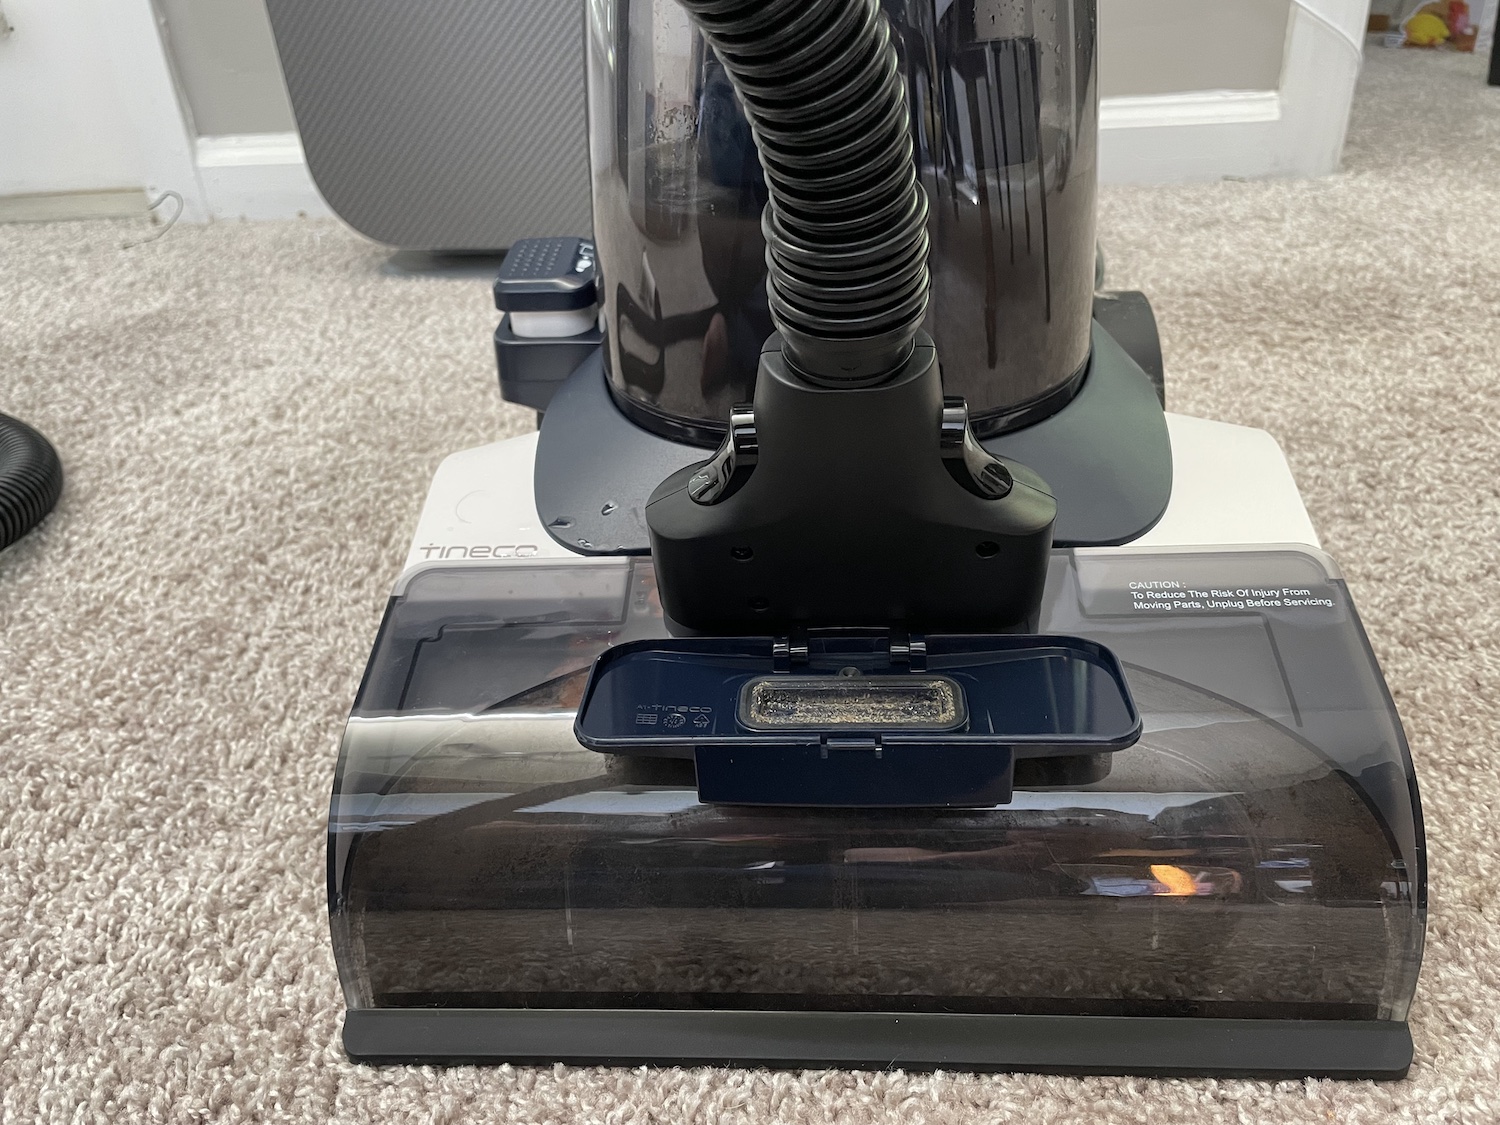 Tineco Carpet One - Test, User Guide, & Review 